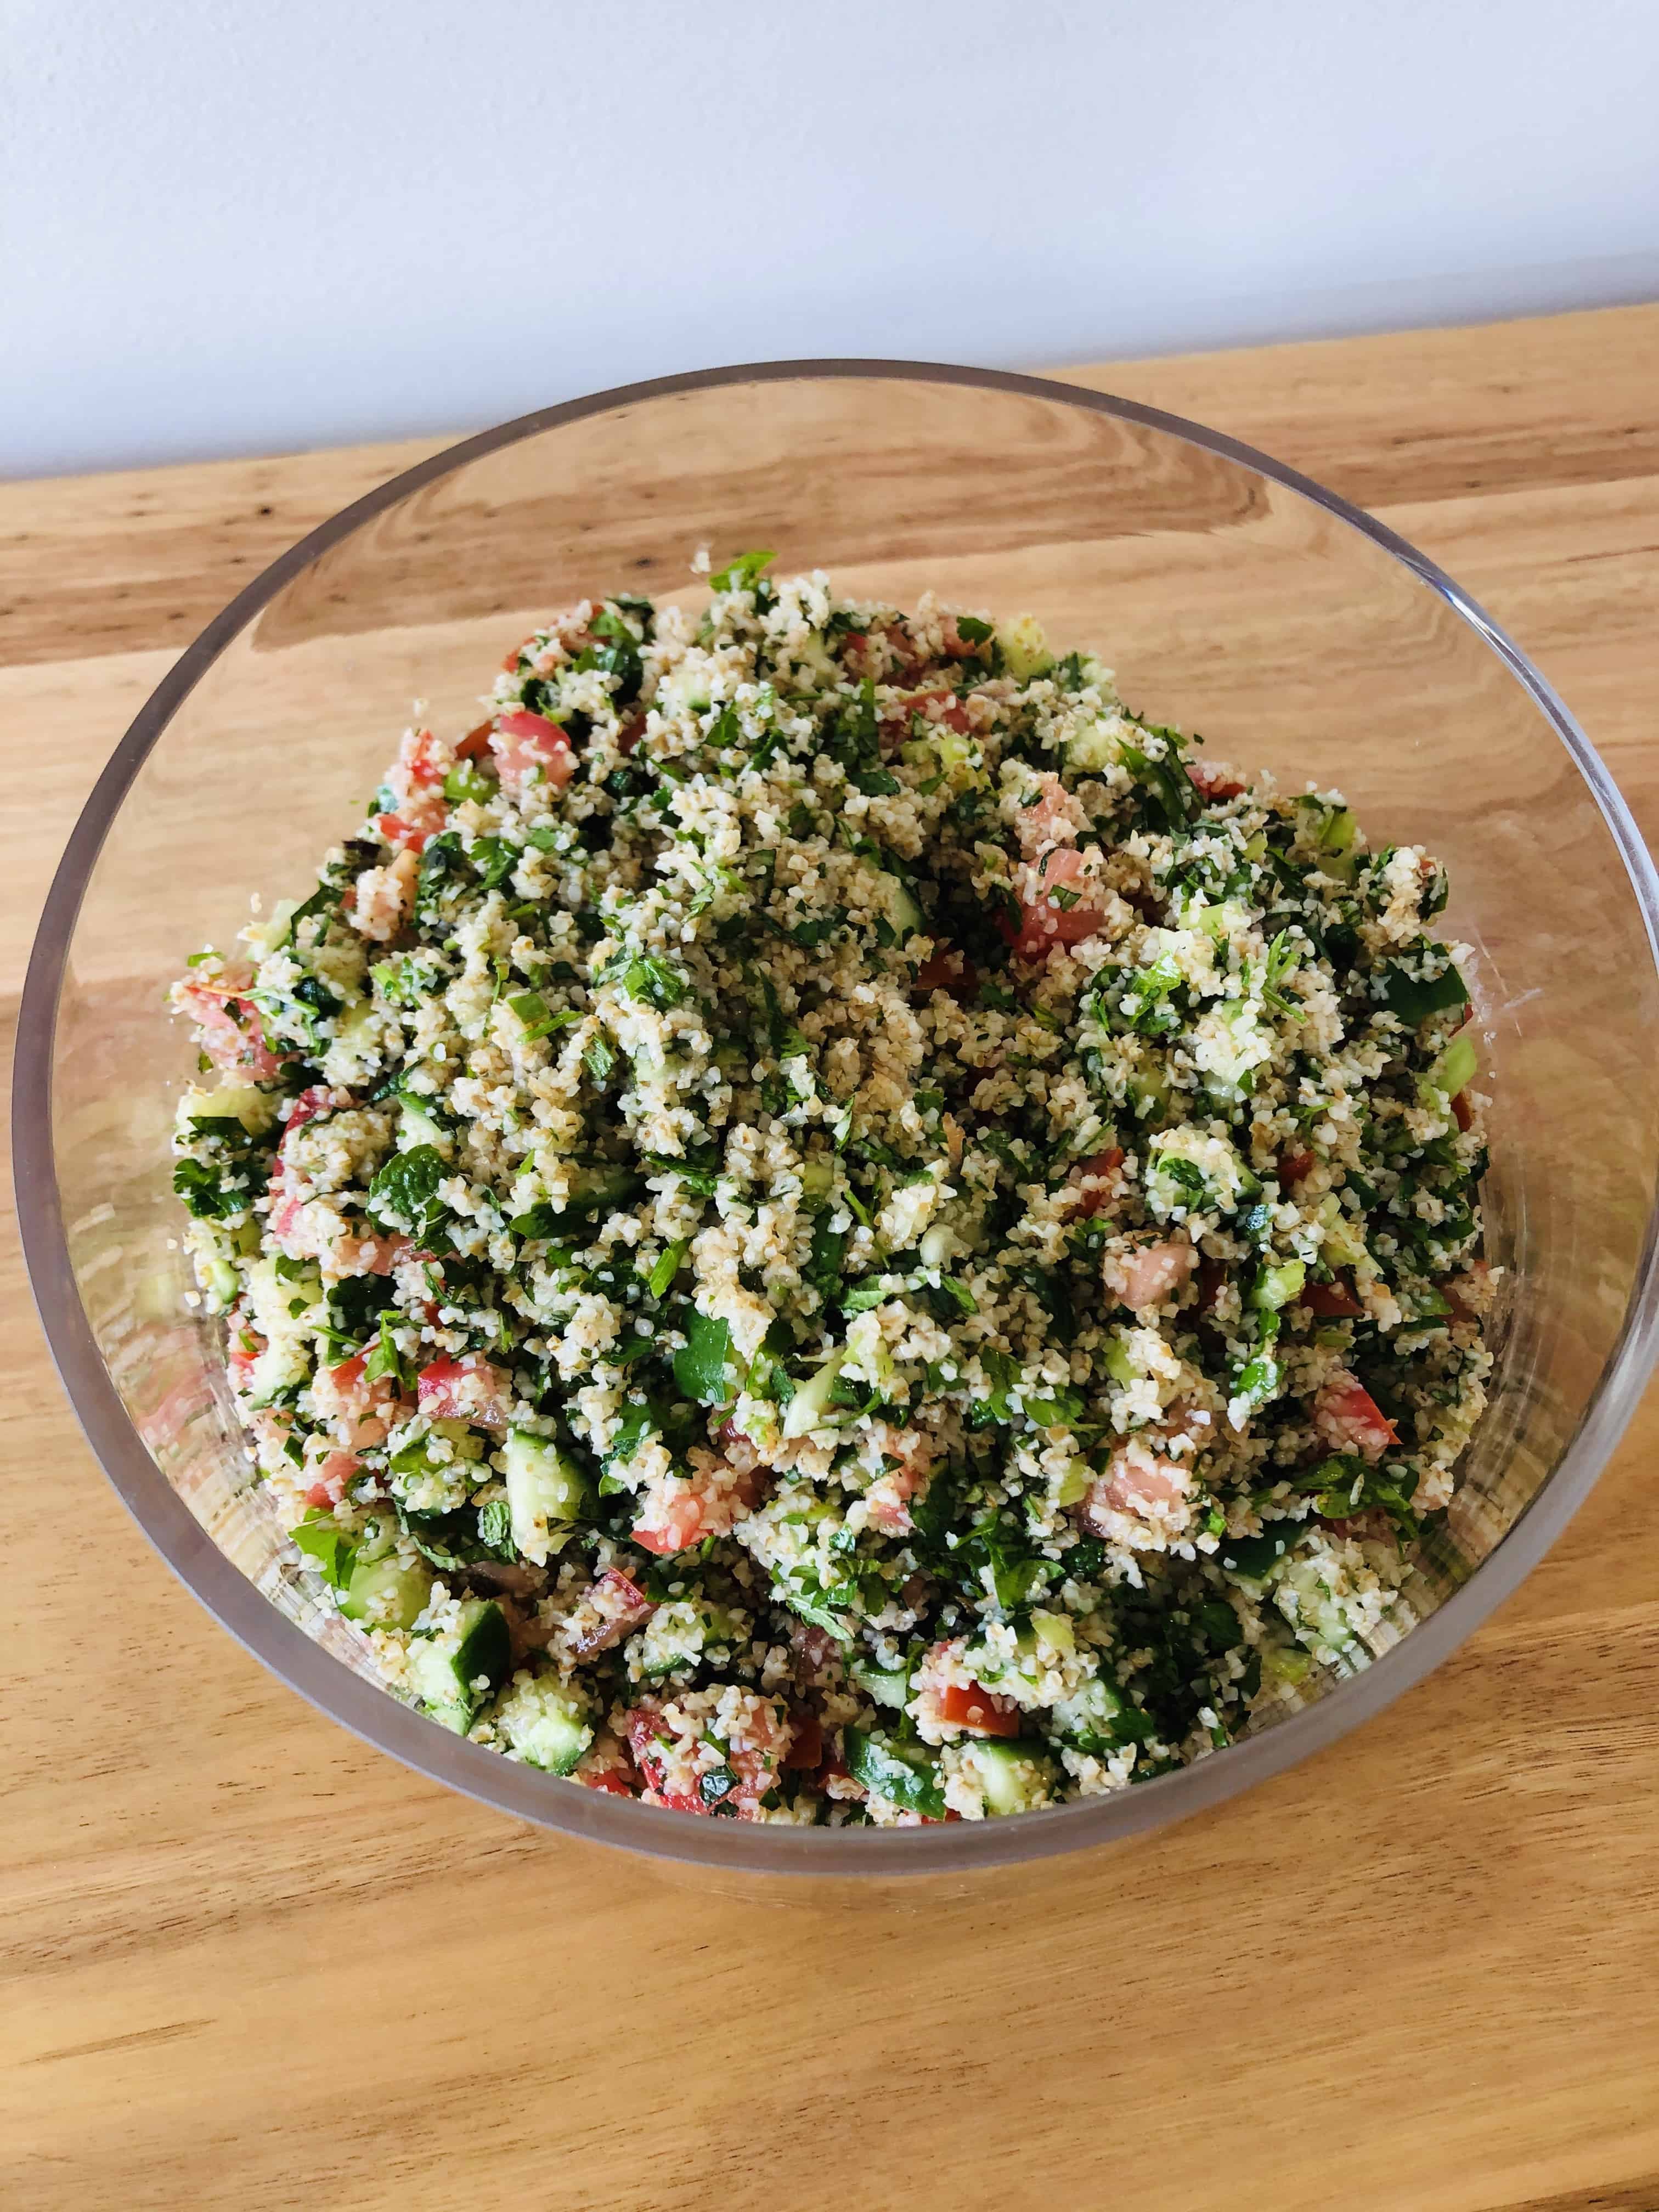 Easy and authentic Tabouli Salad Recipe (Tabbouleh)